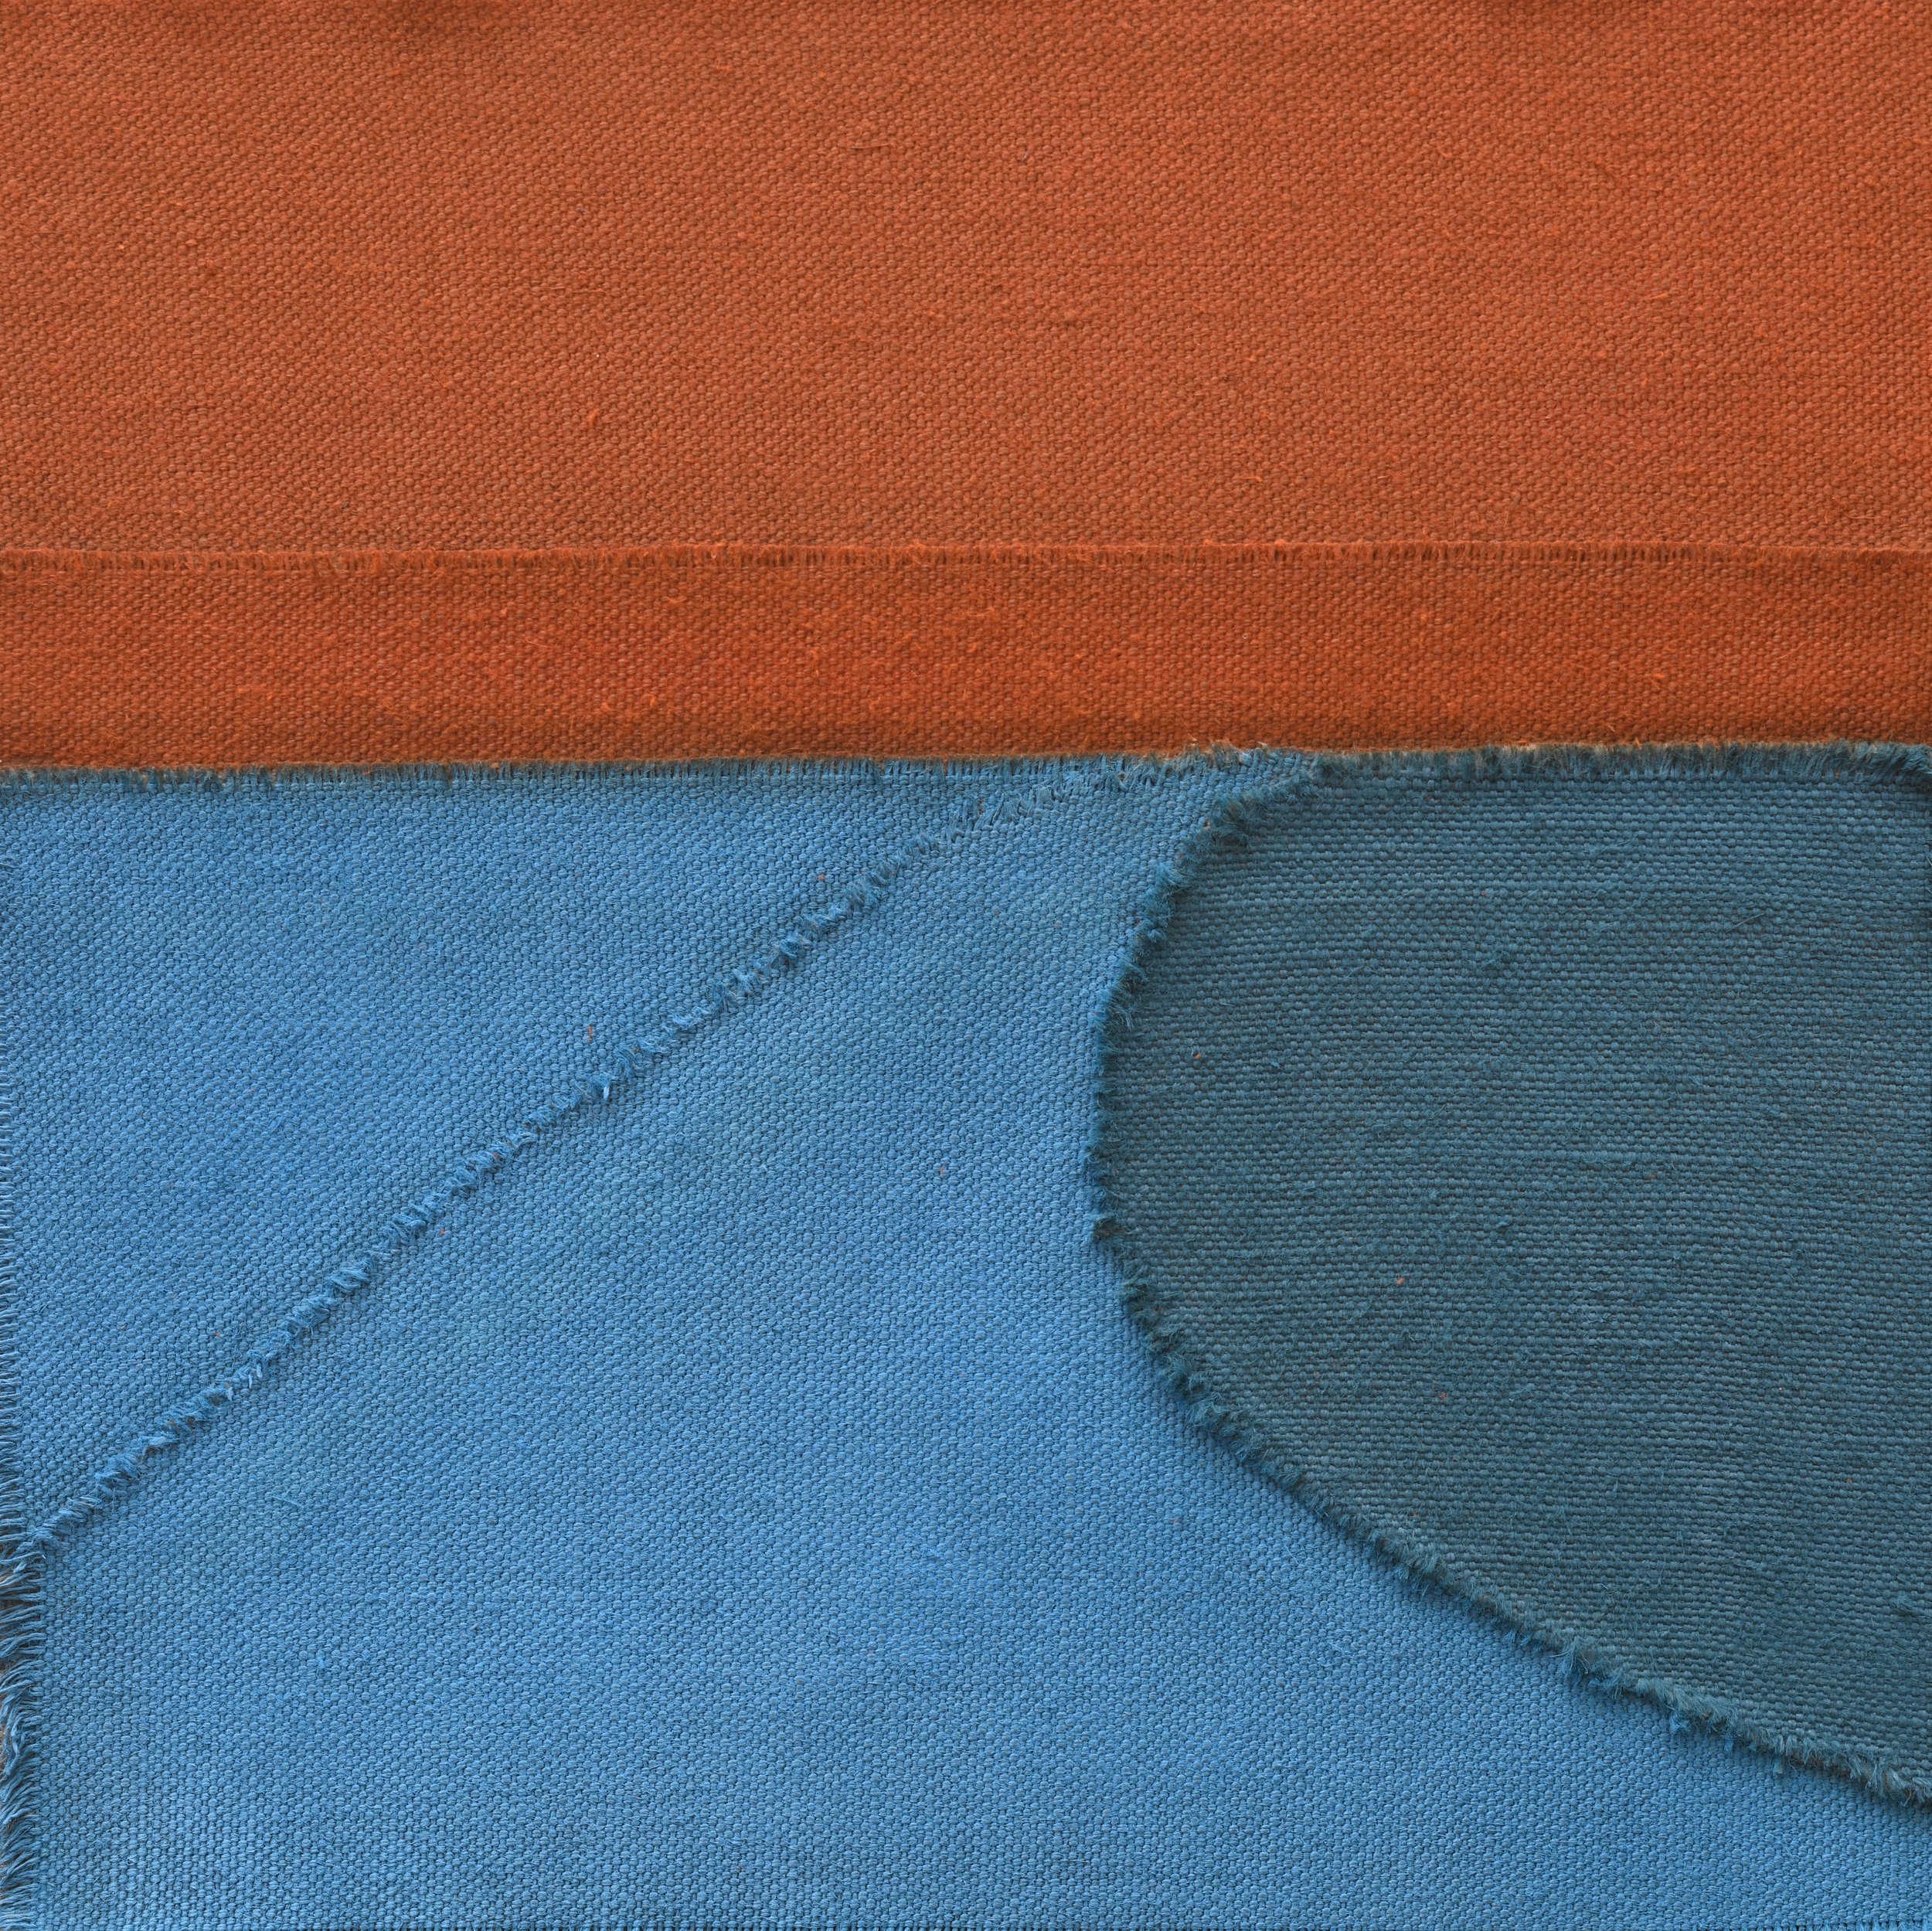  Untitled (Orange / Blue), 2019. Oil on Collaged Linen, 12 x 12 inches. 